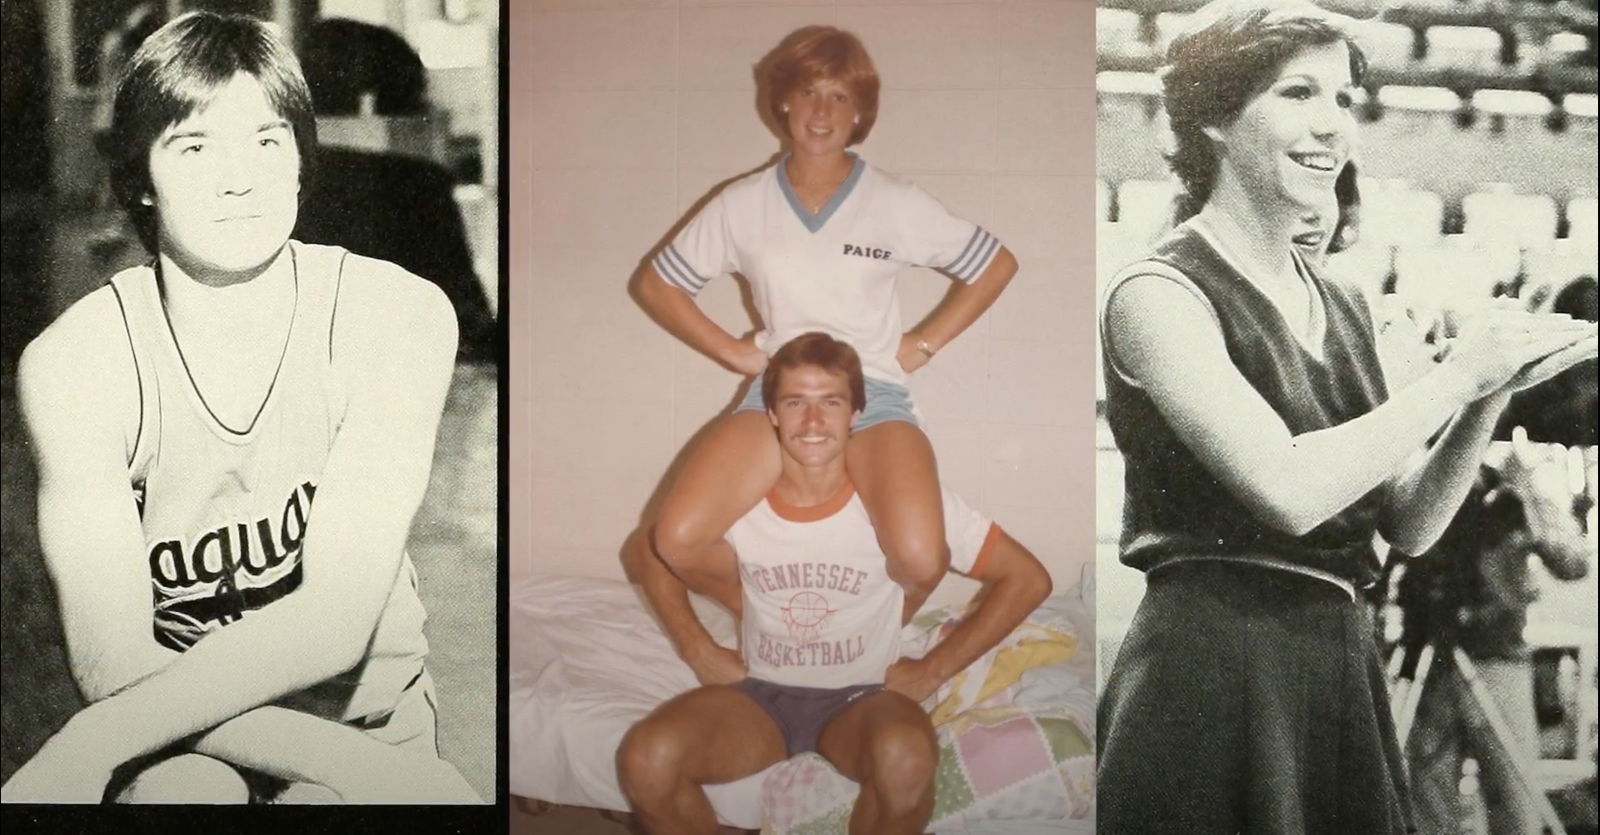 collage of a young man and young woman doing college athletics